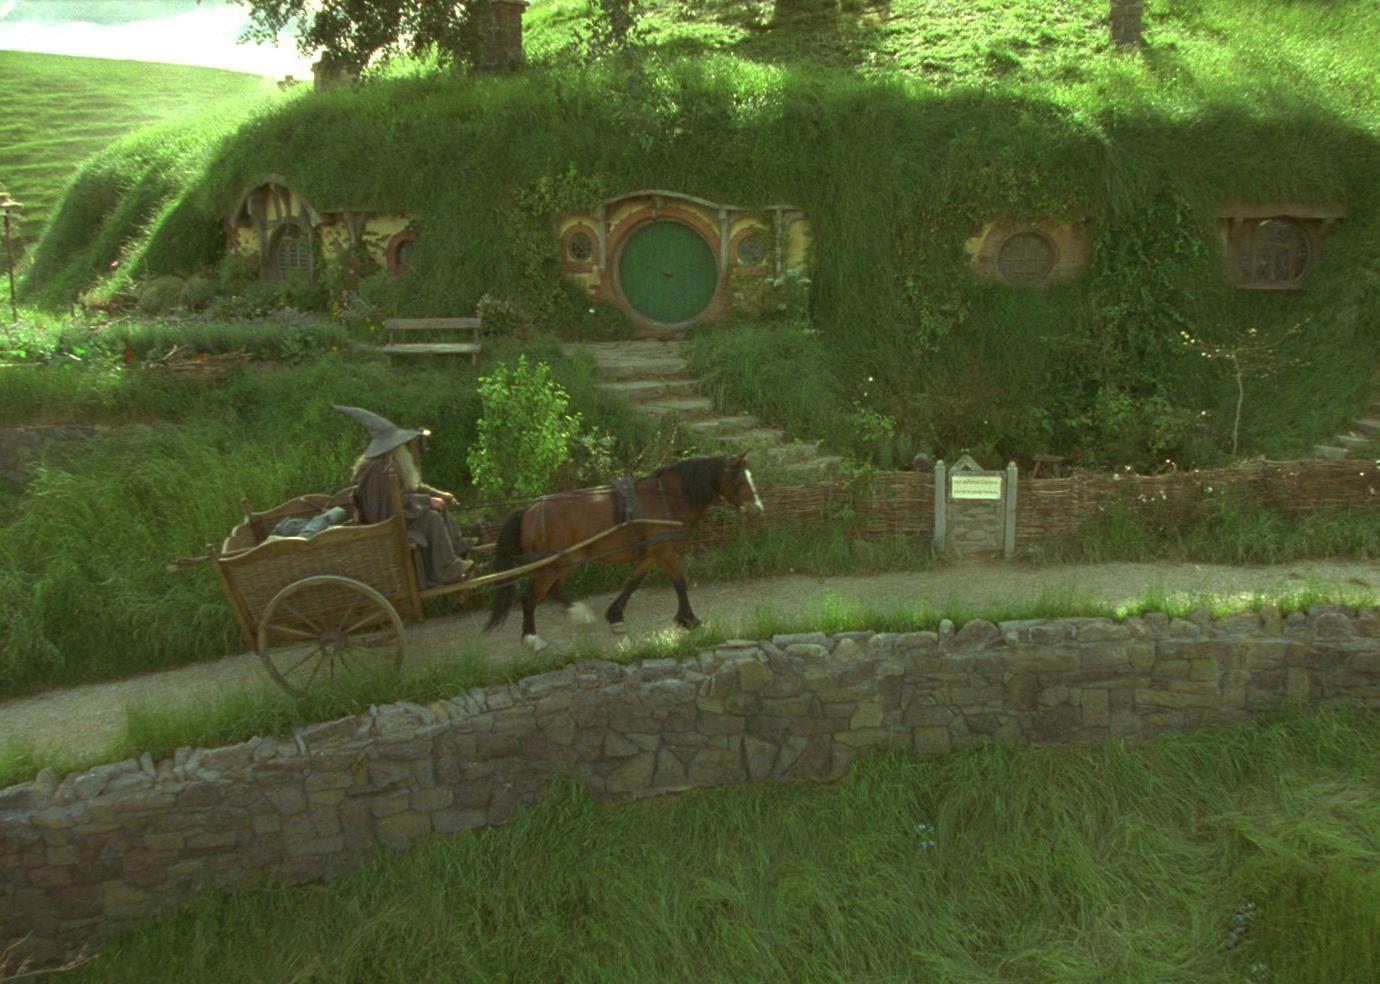 A wizard in gray with a pointy hat travels on a horse and cart up a green hill.